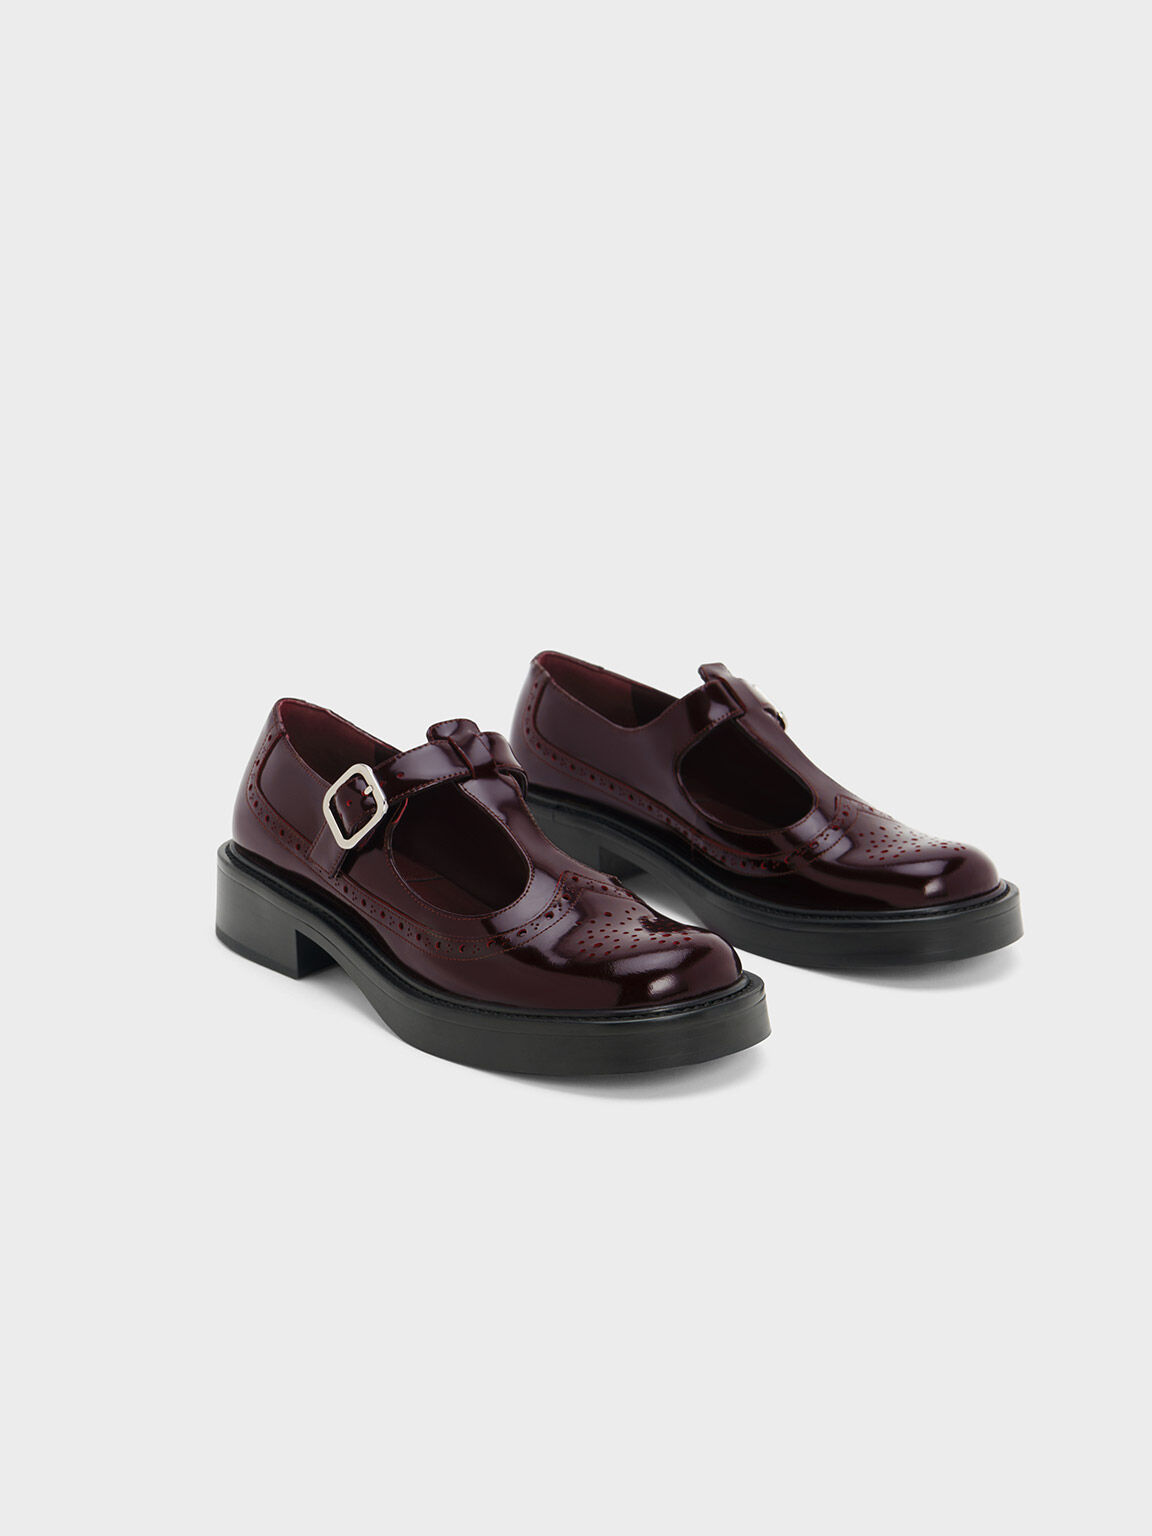 Brogue Leather T-Bar Mary Janes - Maroon